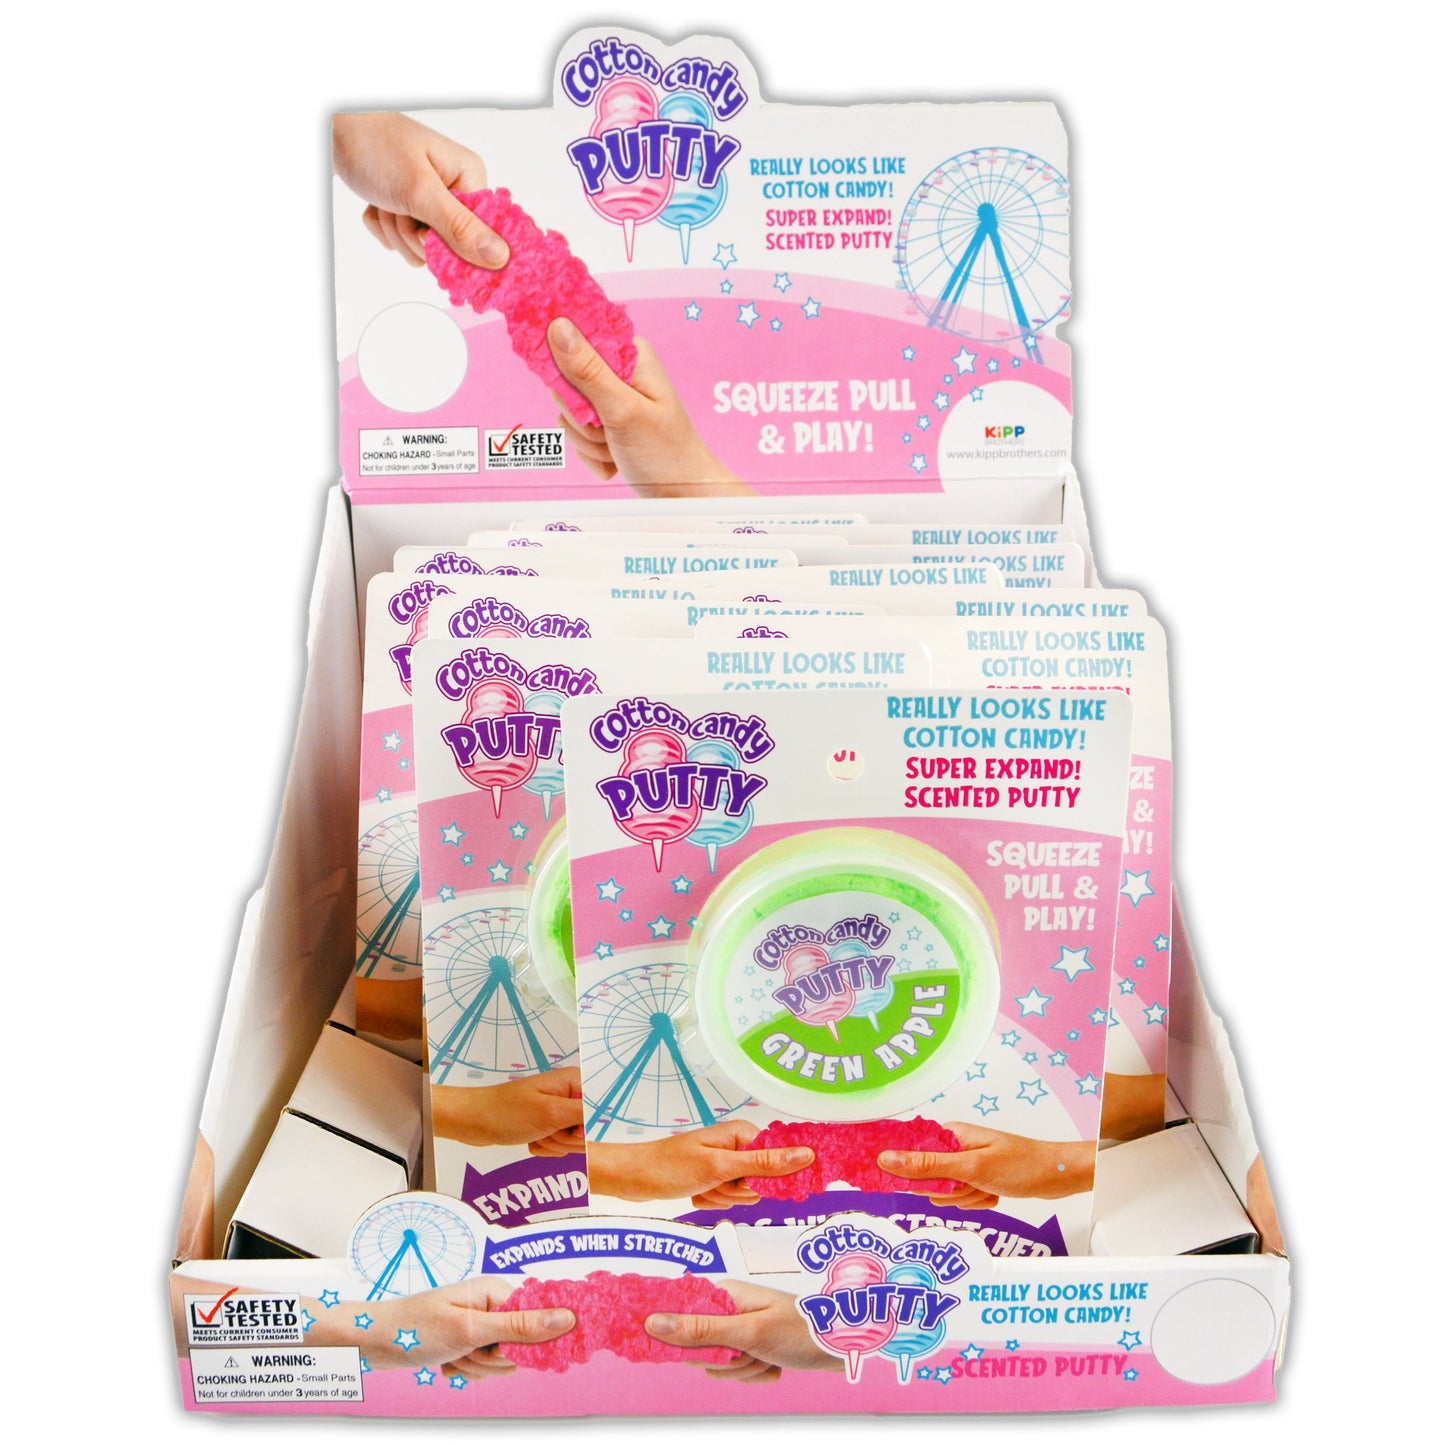 ITEM NUMBER 022648 COTTON CANDY PUTTY 12 PIECES PER DISPLAY